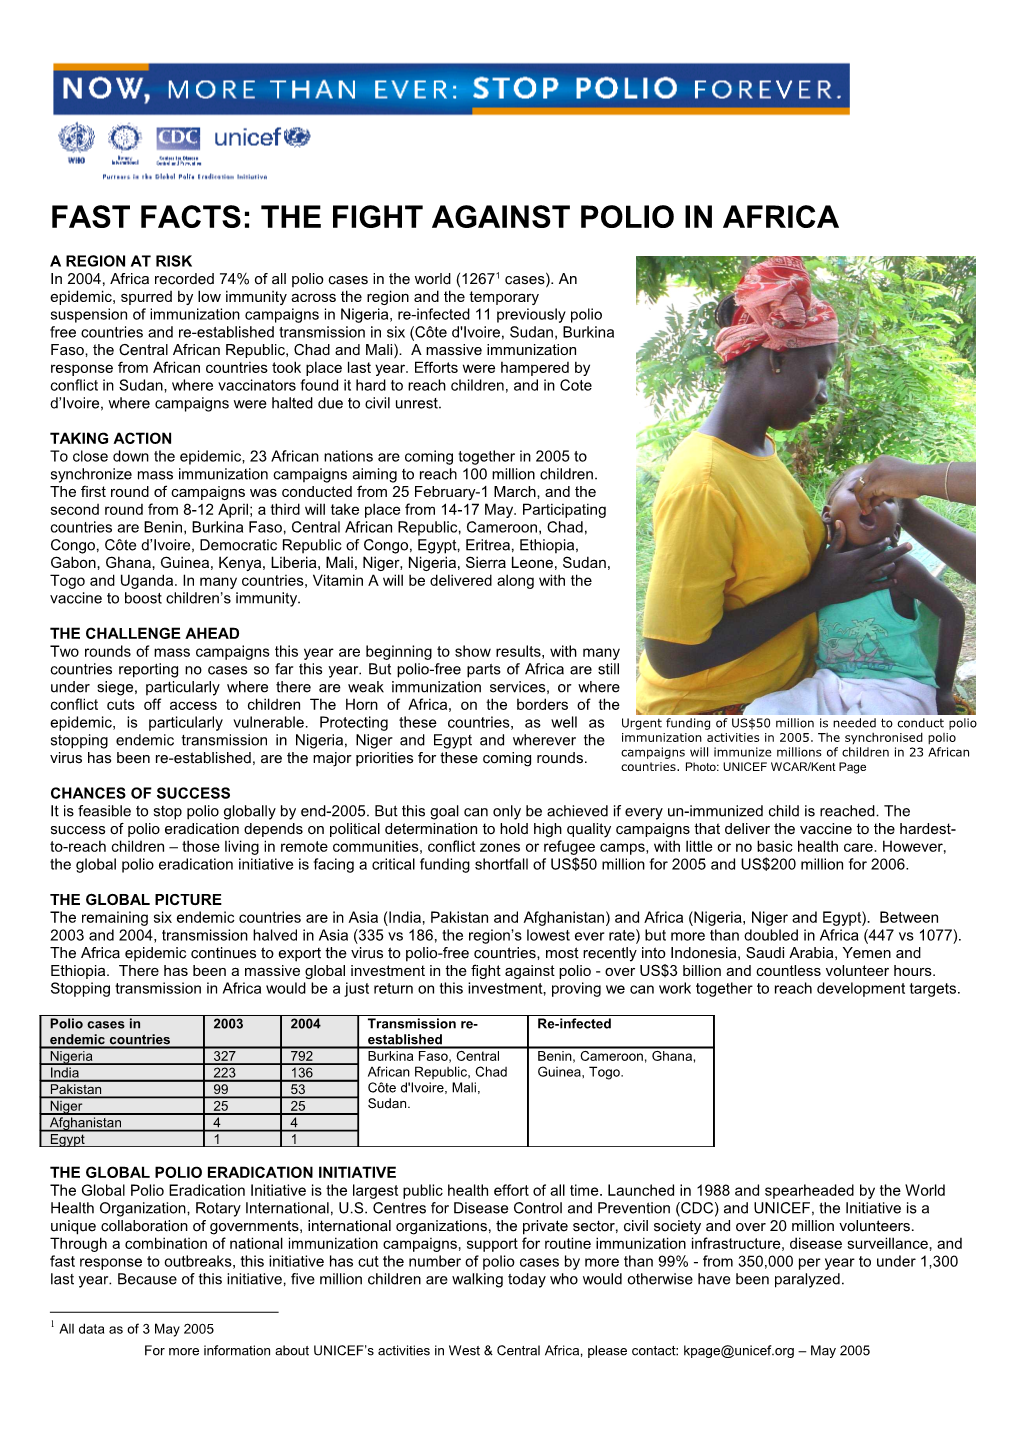 Fast Facts: Polio in Africa